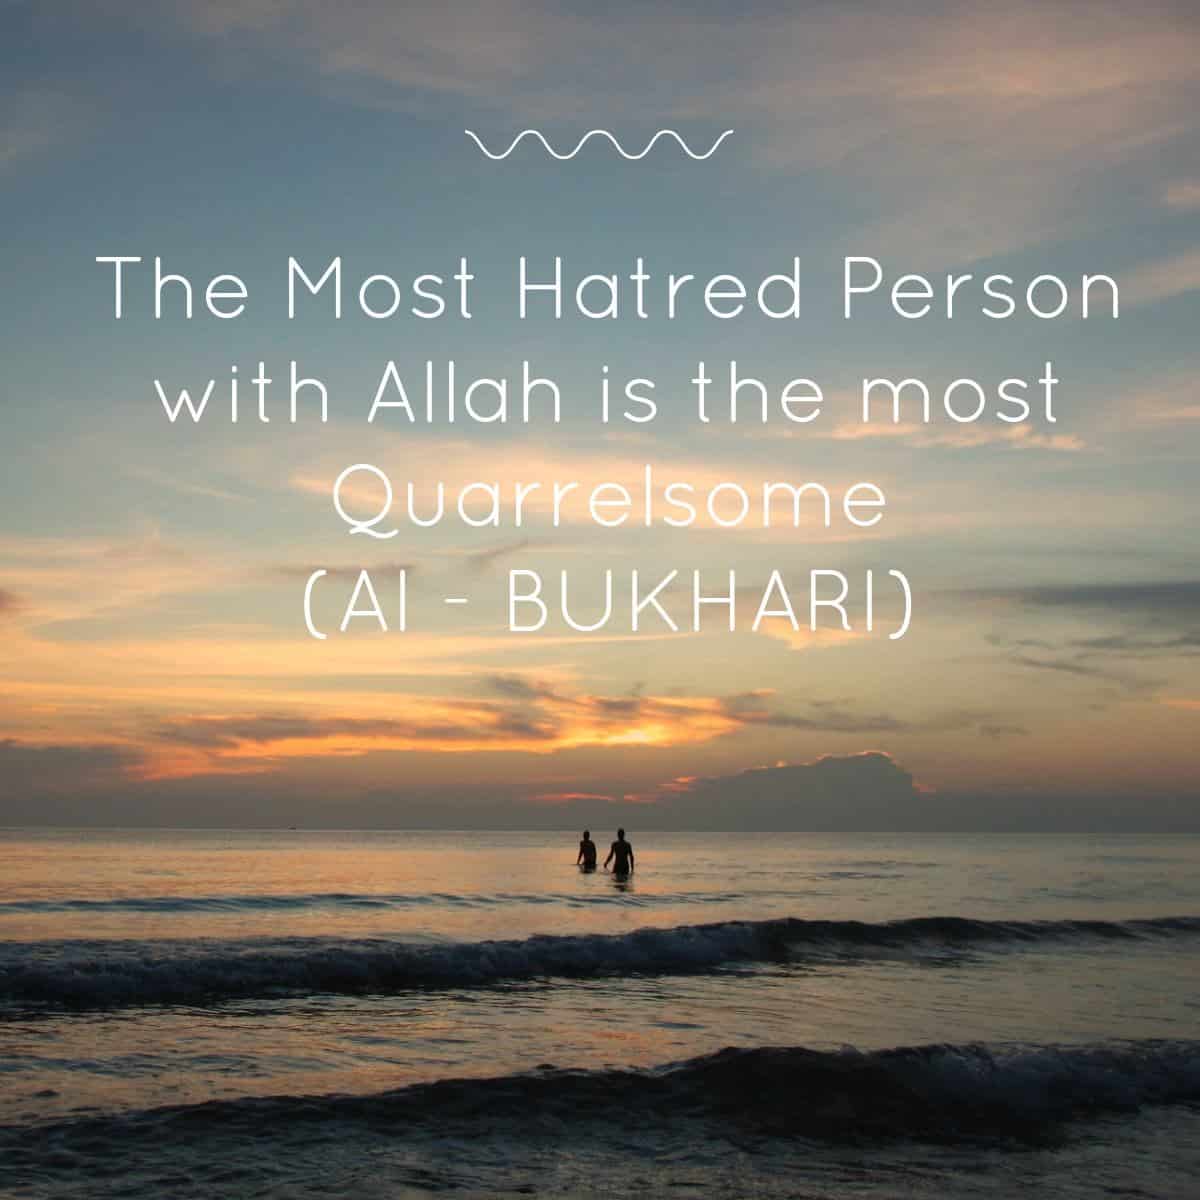 40 Islamic Quotes About Anger and Anger Management  't Quarrel Everytime